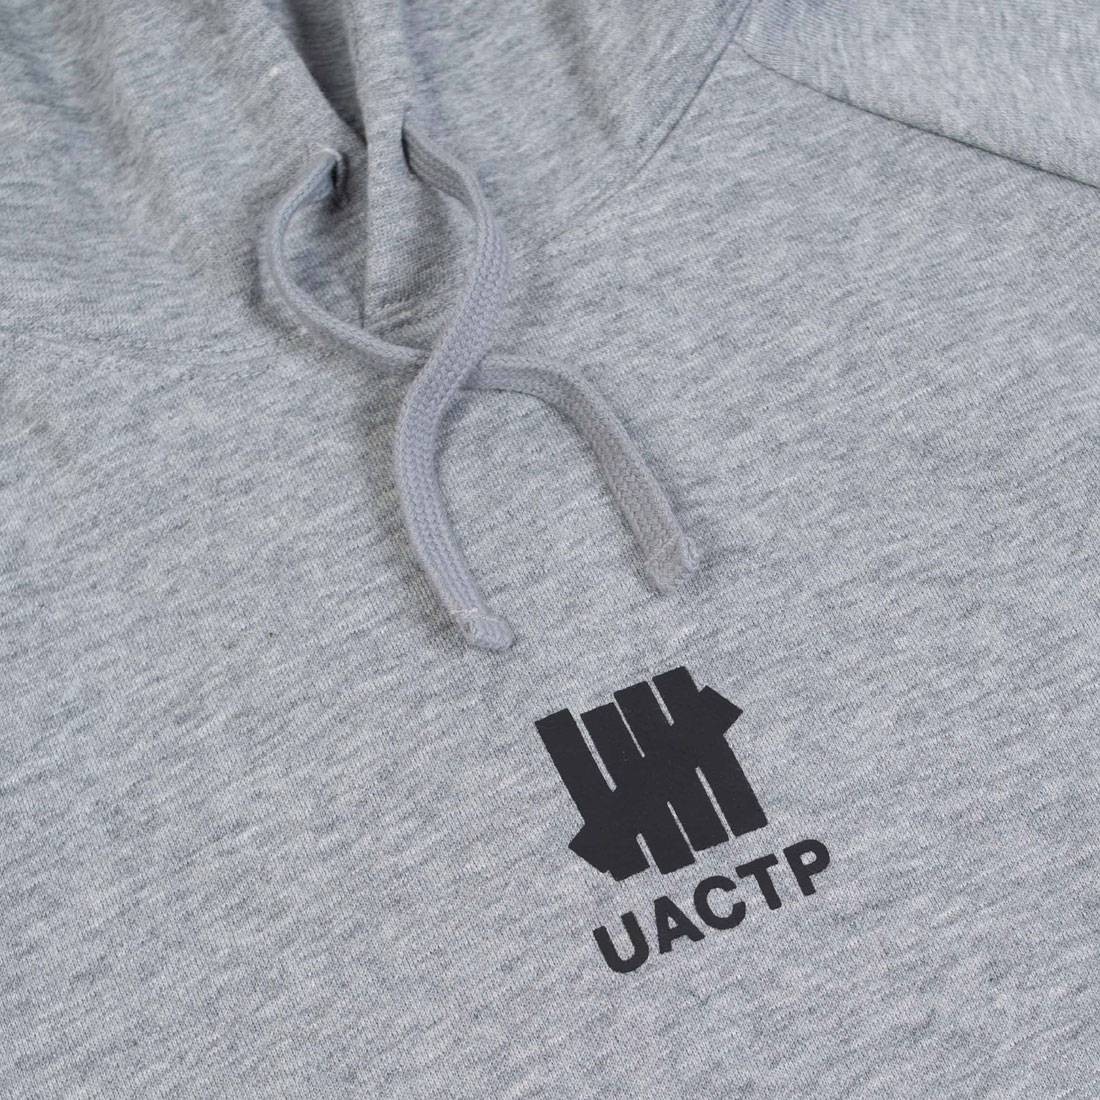 Undefeated Men UACTP Short Sleeve Pullover Hoody gray heather